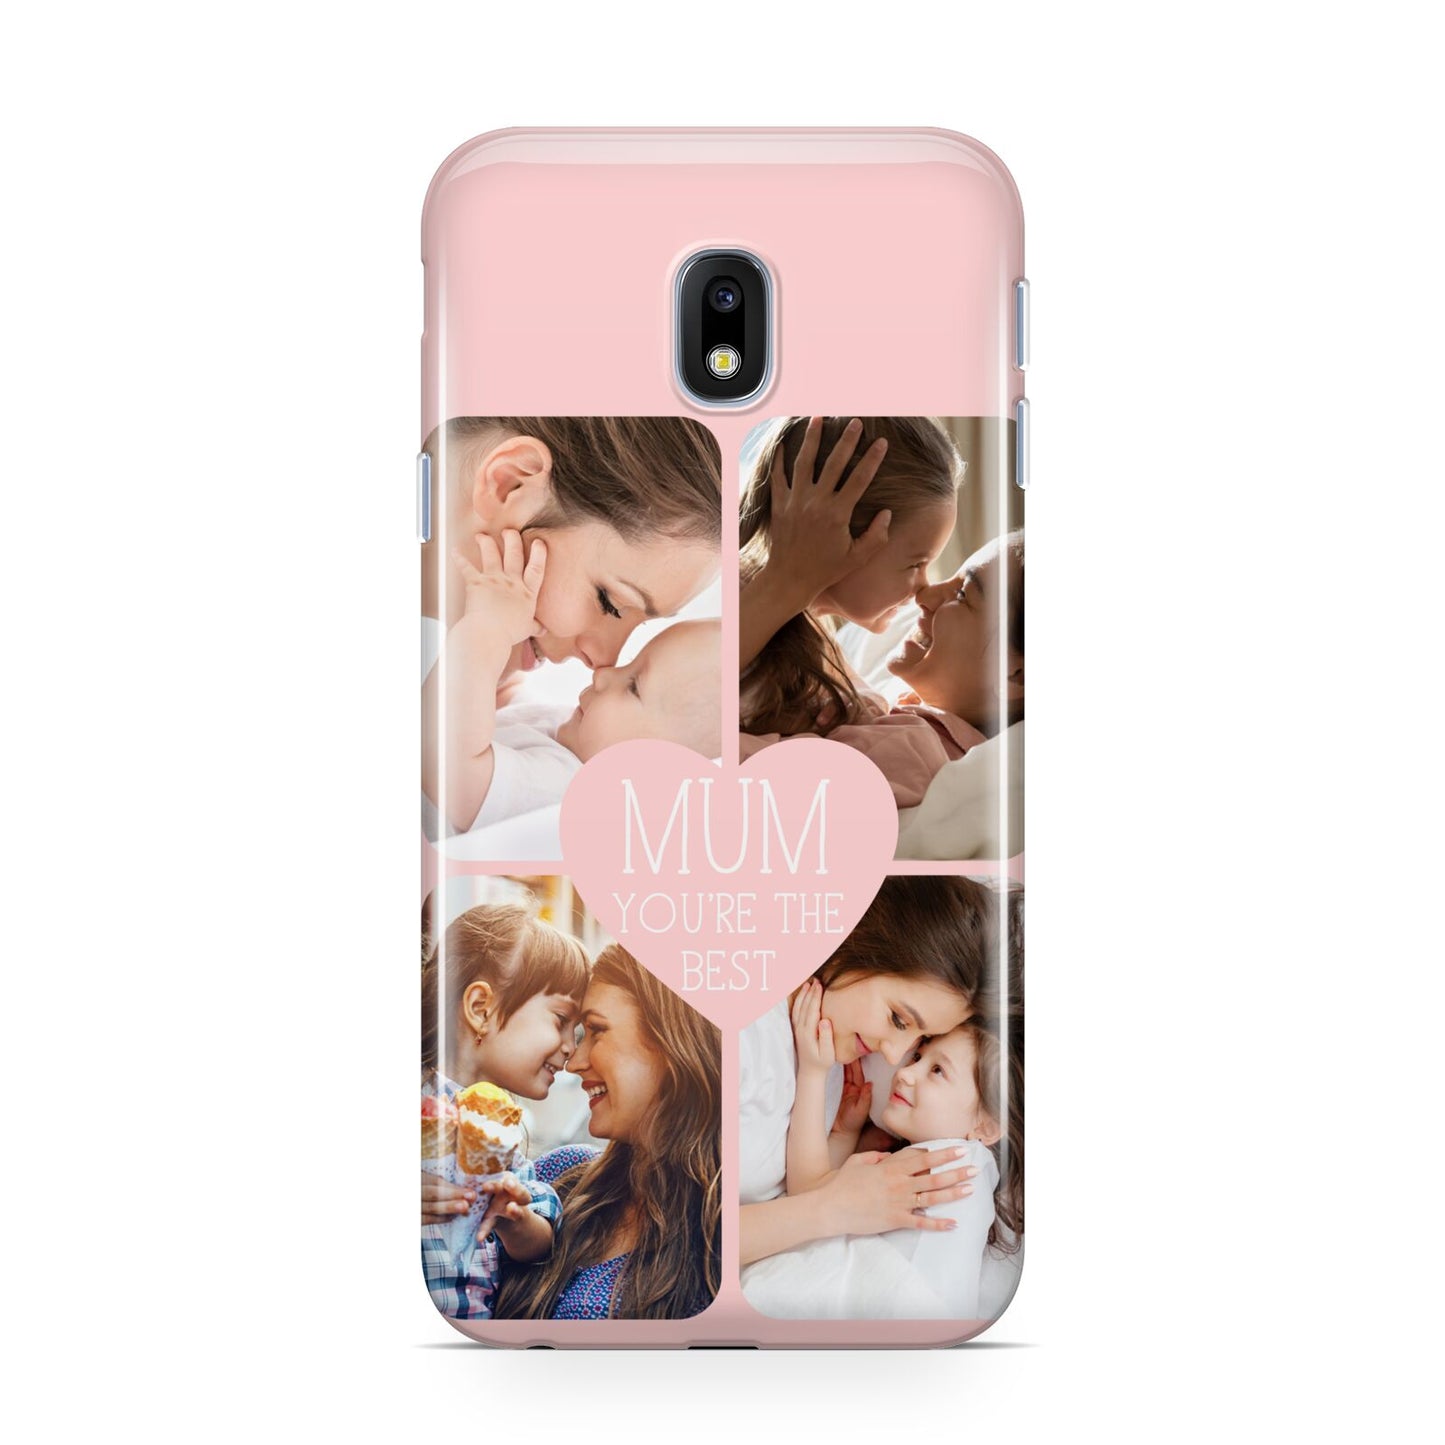 Mothers Day Four Photo Upload Samsung Galaxy J3 2017 Case